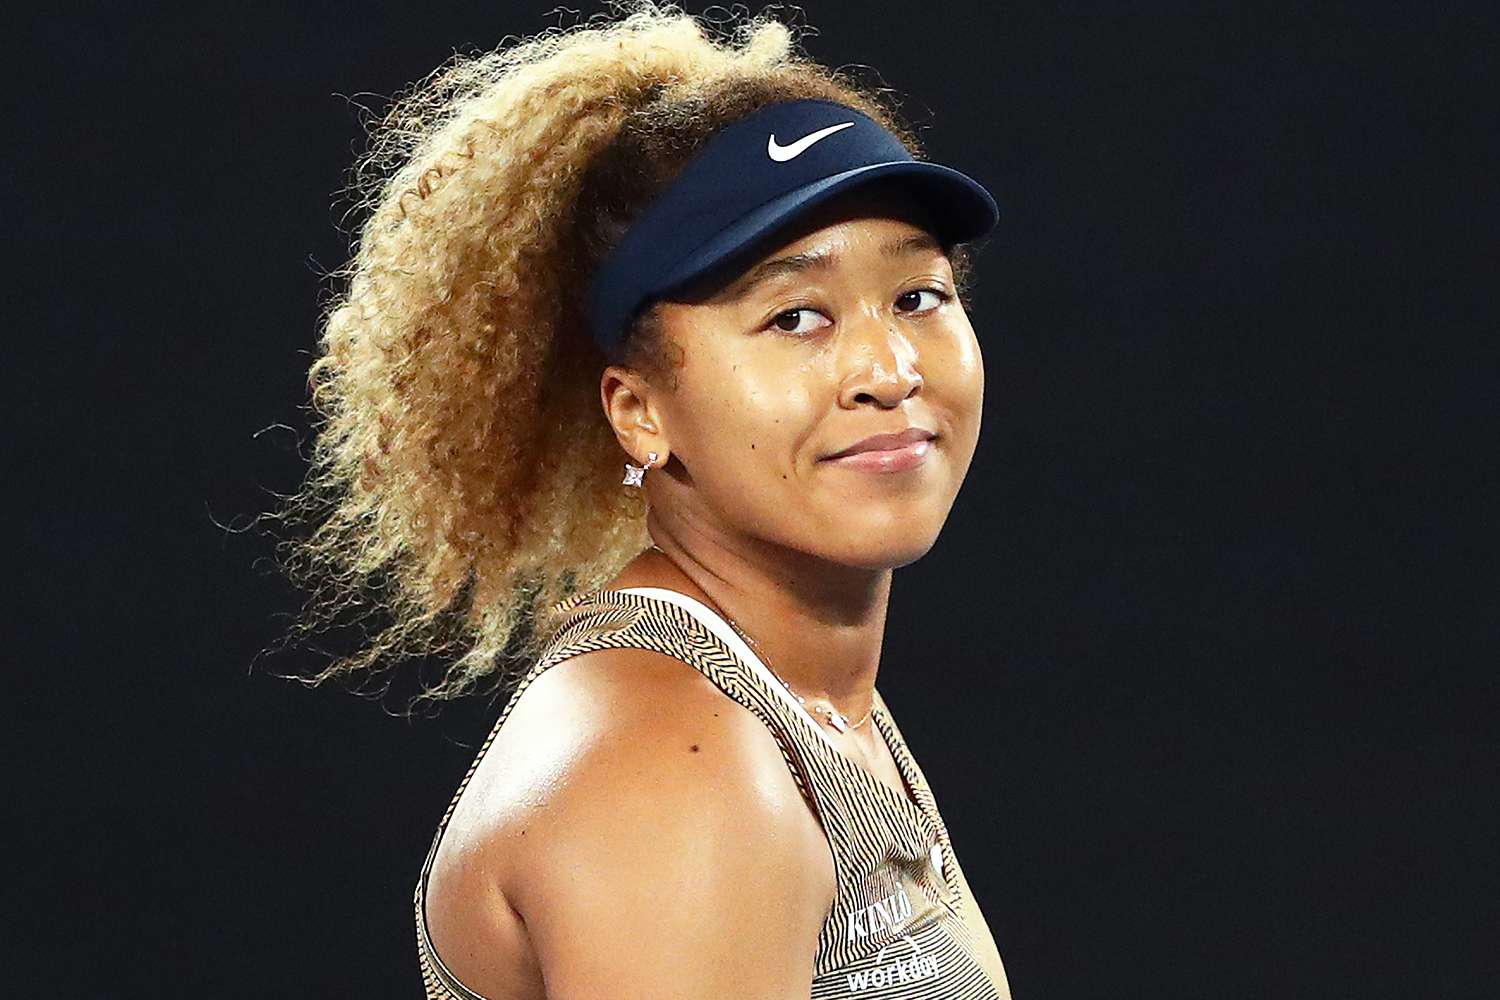 Naomi Osaka of Japan looks on after her match against Andrea Petkovic of Germany during day five of the Melbourne Summer Set at Melbourne Park on January 07, 2022 in Melbourne, Australia.